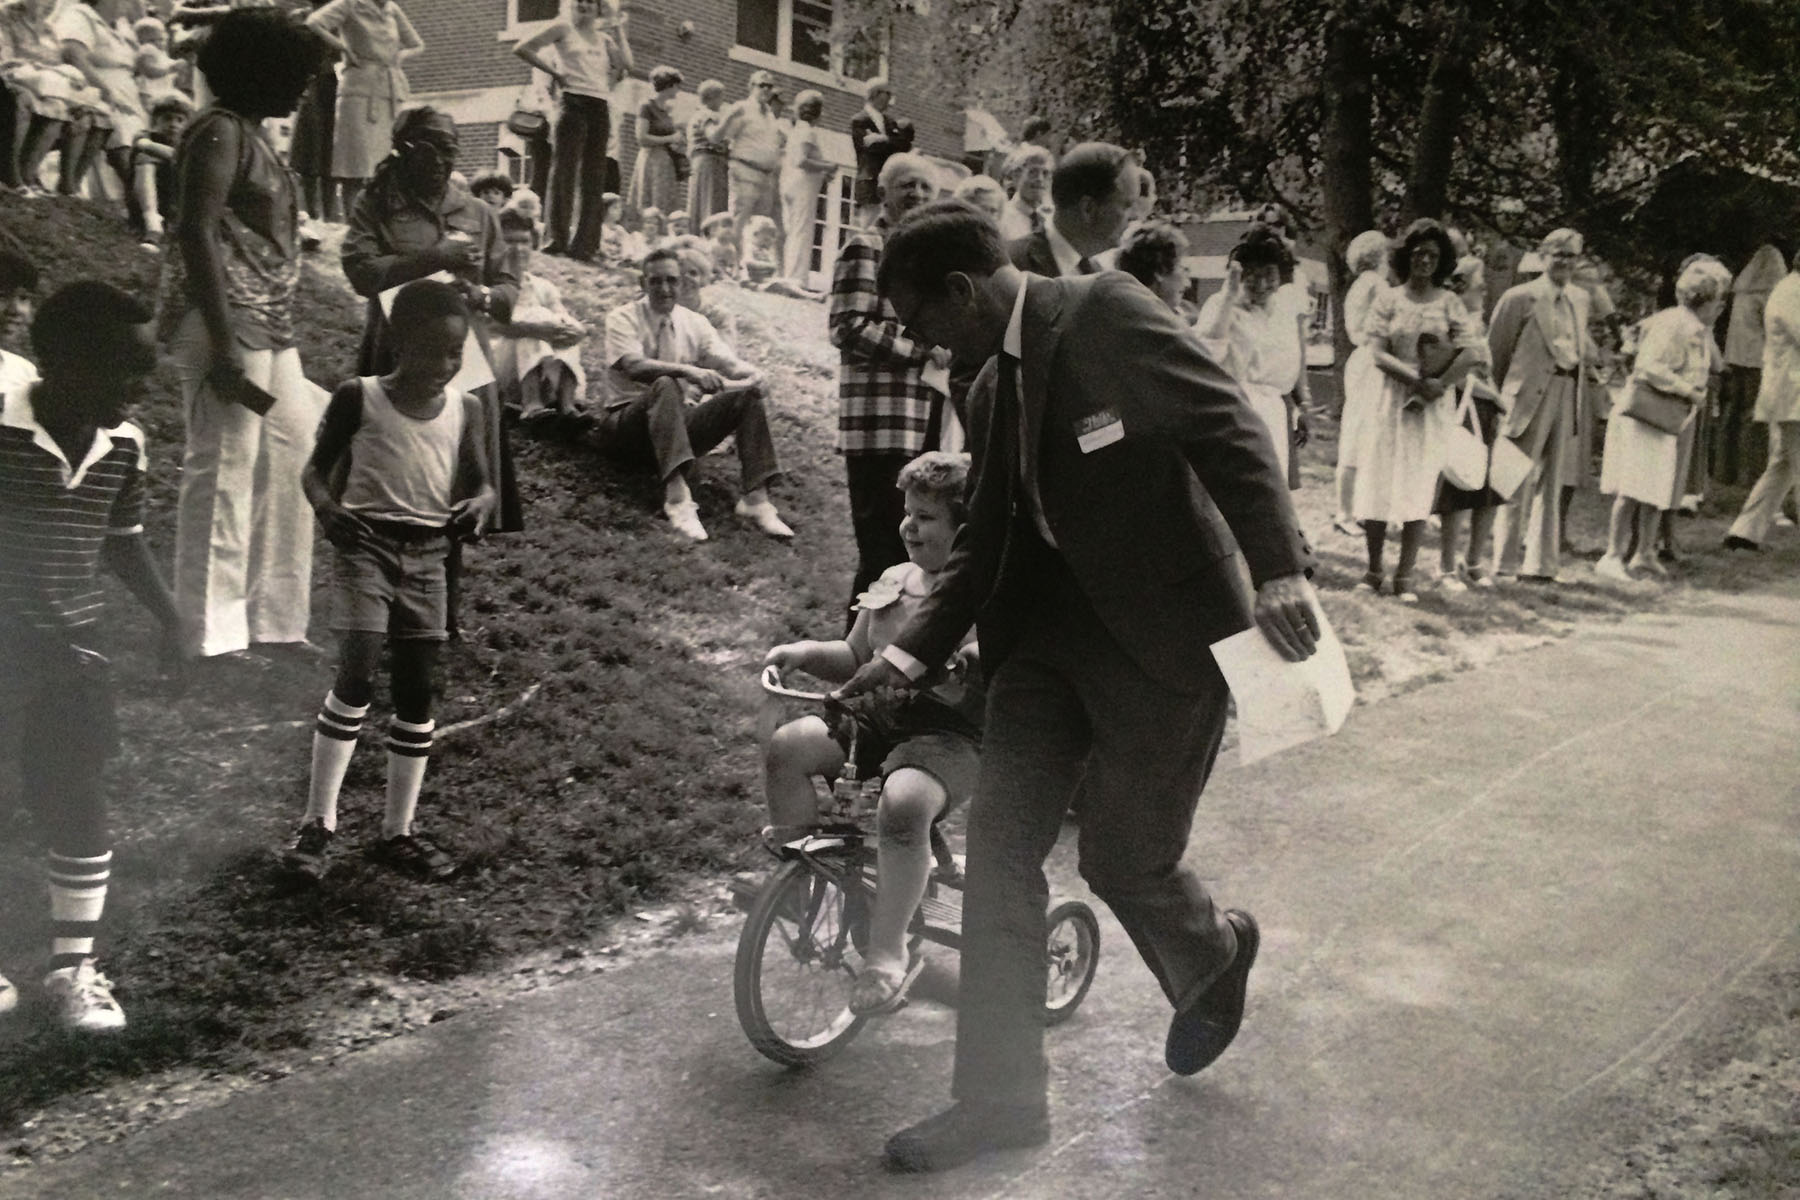 In this black and white image from 1978, a man leads a child on a tricycle down a bike train while people watch, smiling and laughing.